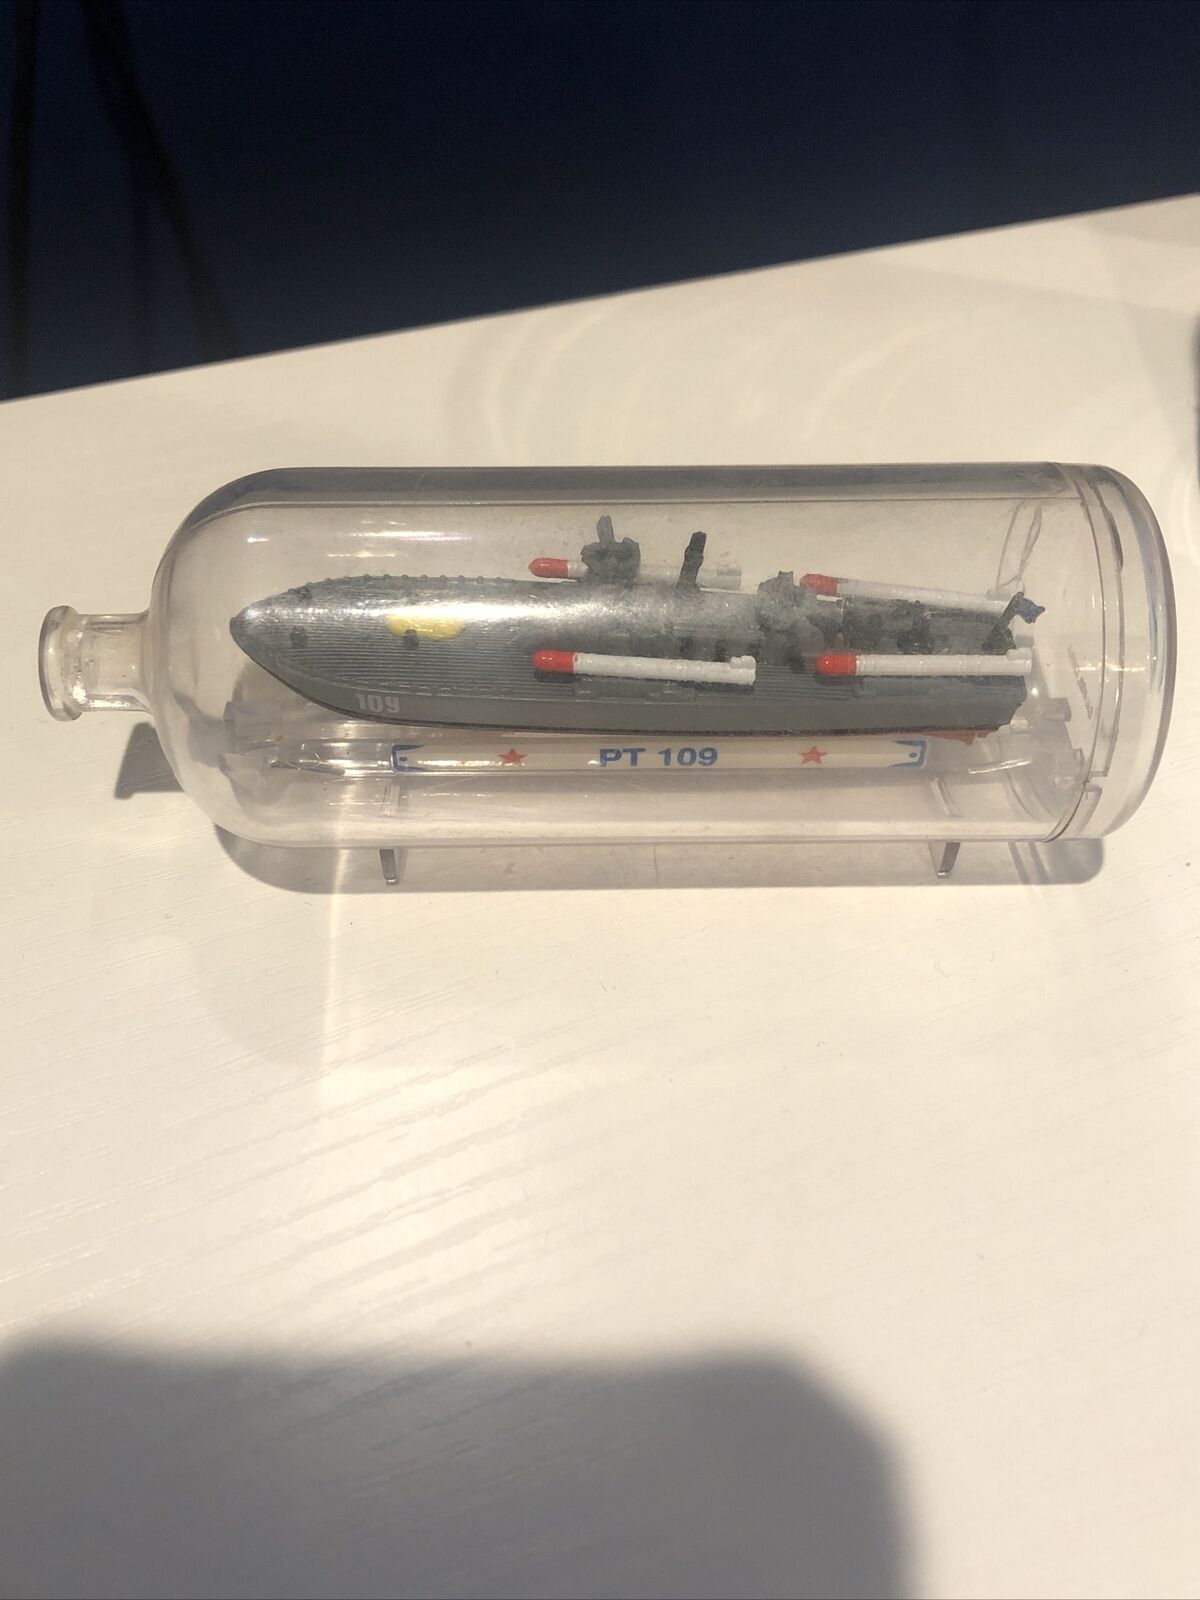 Galoob Micro Machines Military Ship in a Bottle PT-109 Motor Torpedo Boat (A-51)